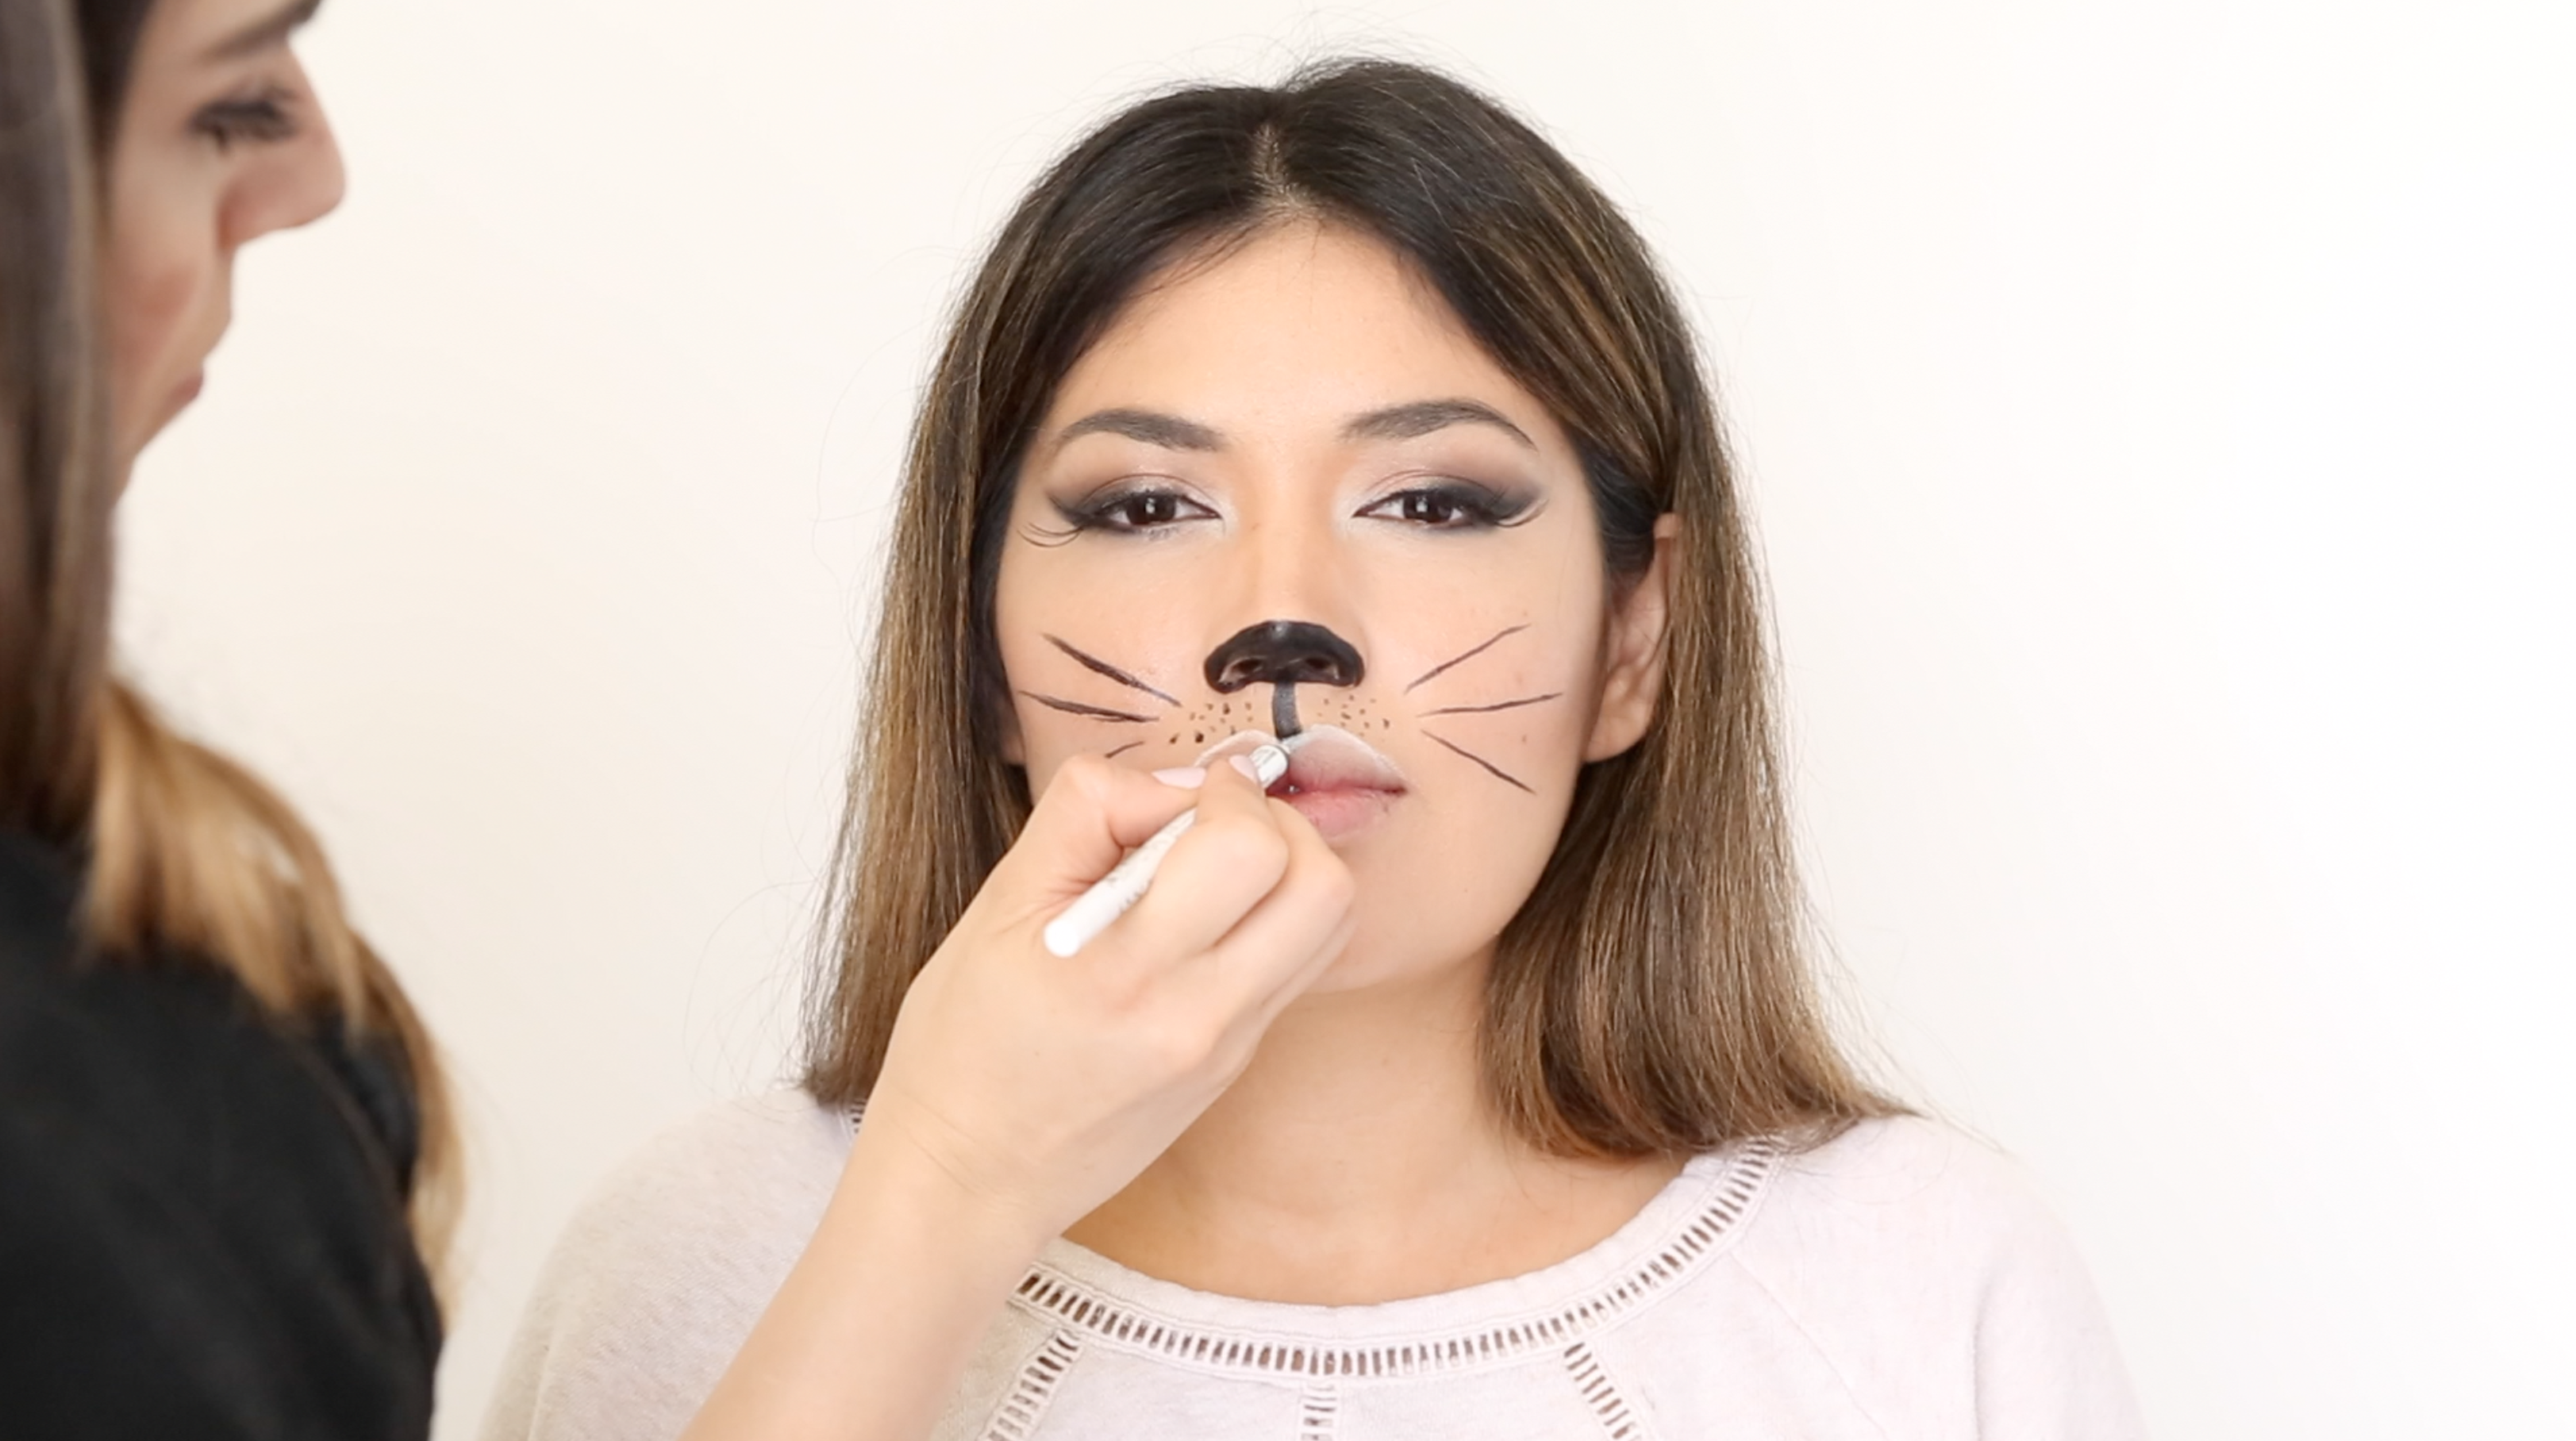 How To Make A Cat Face With Makeup Ehow